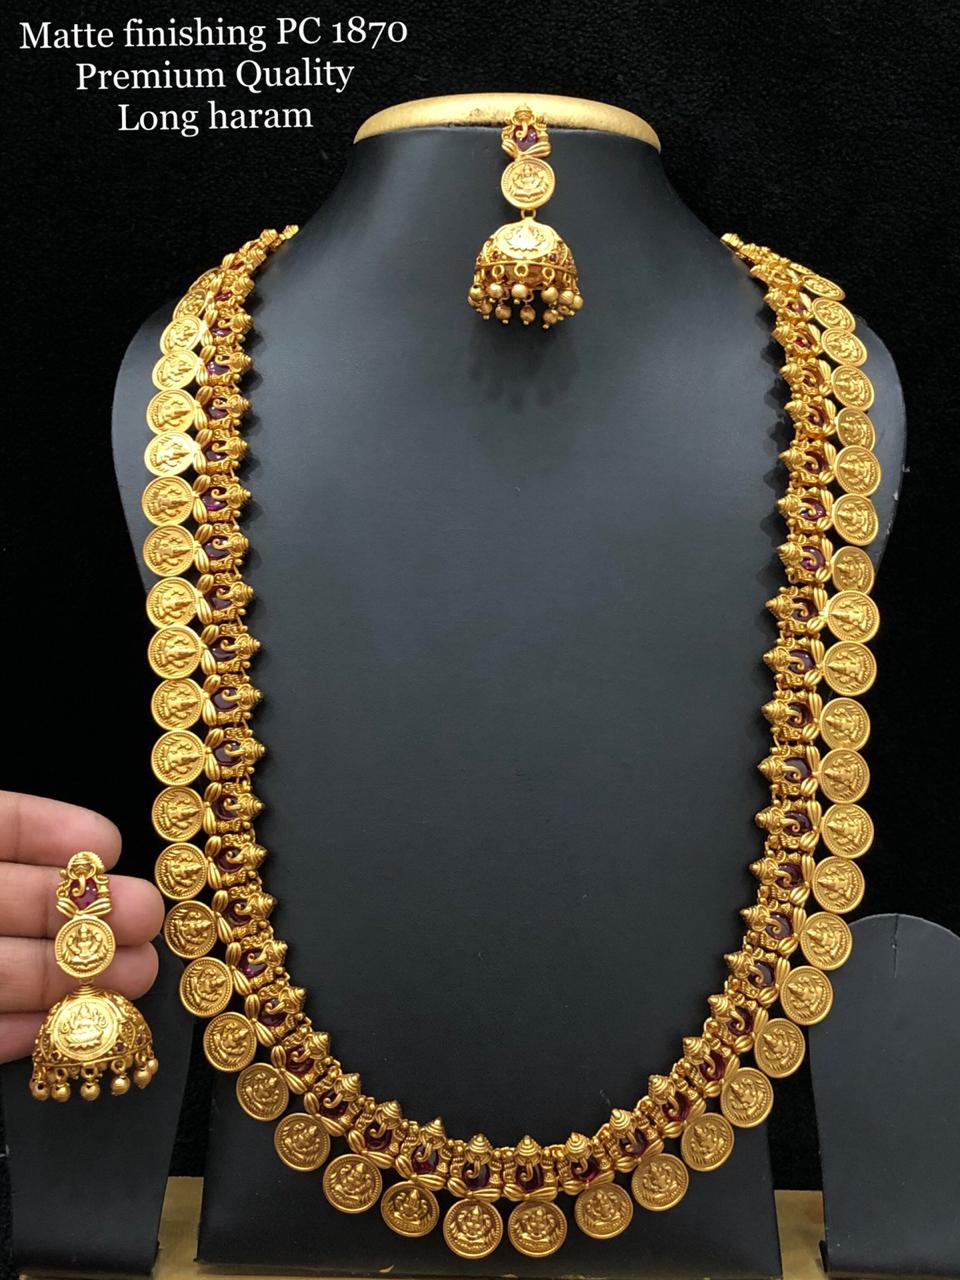 Jewelry Collection New 2021 - Indian Jewelry Designs